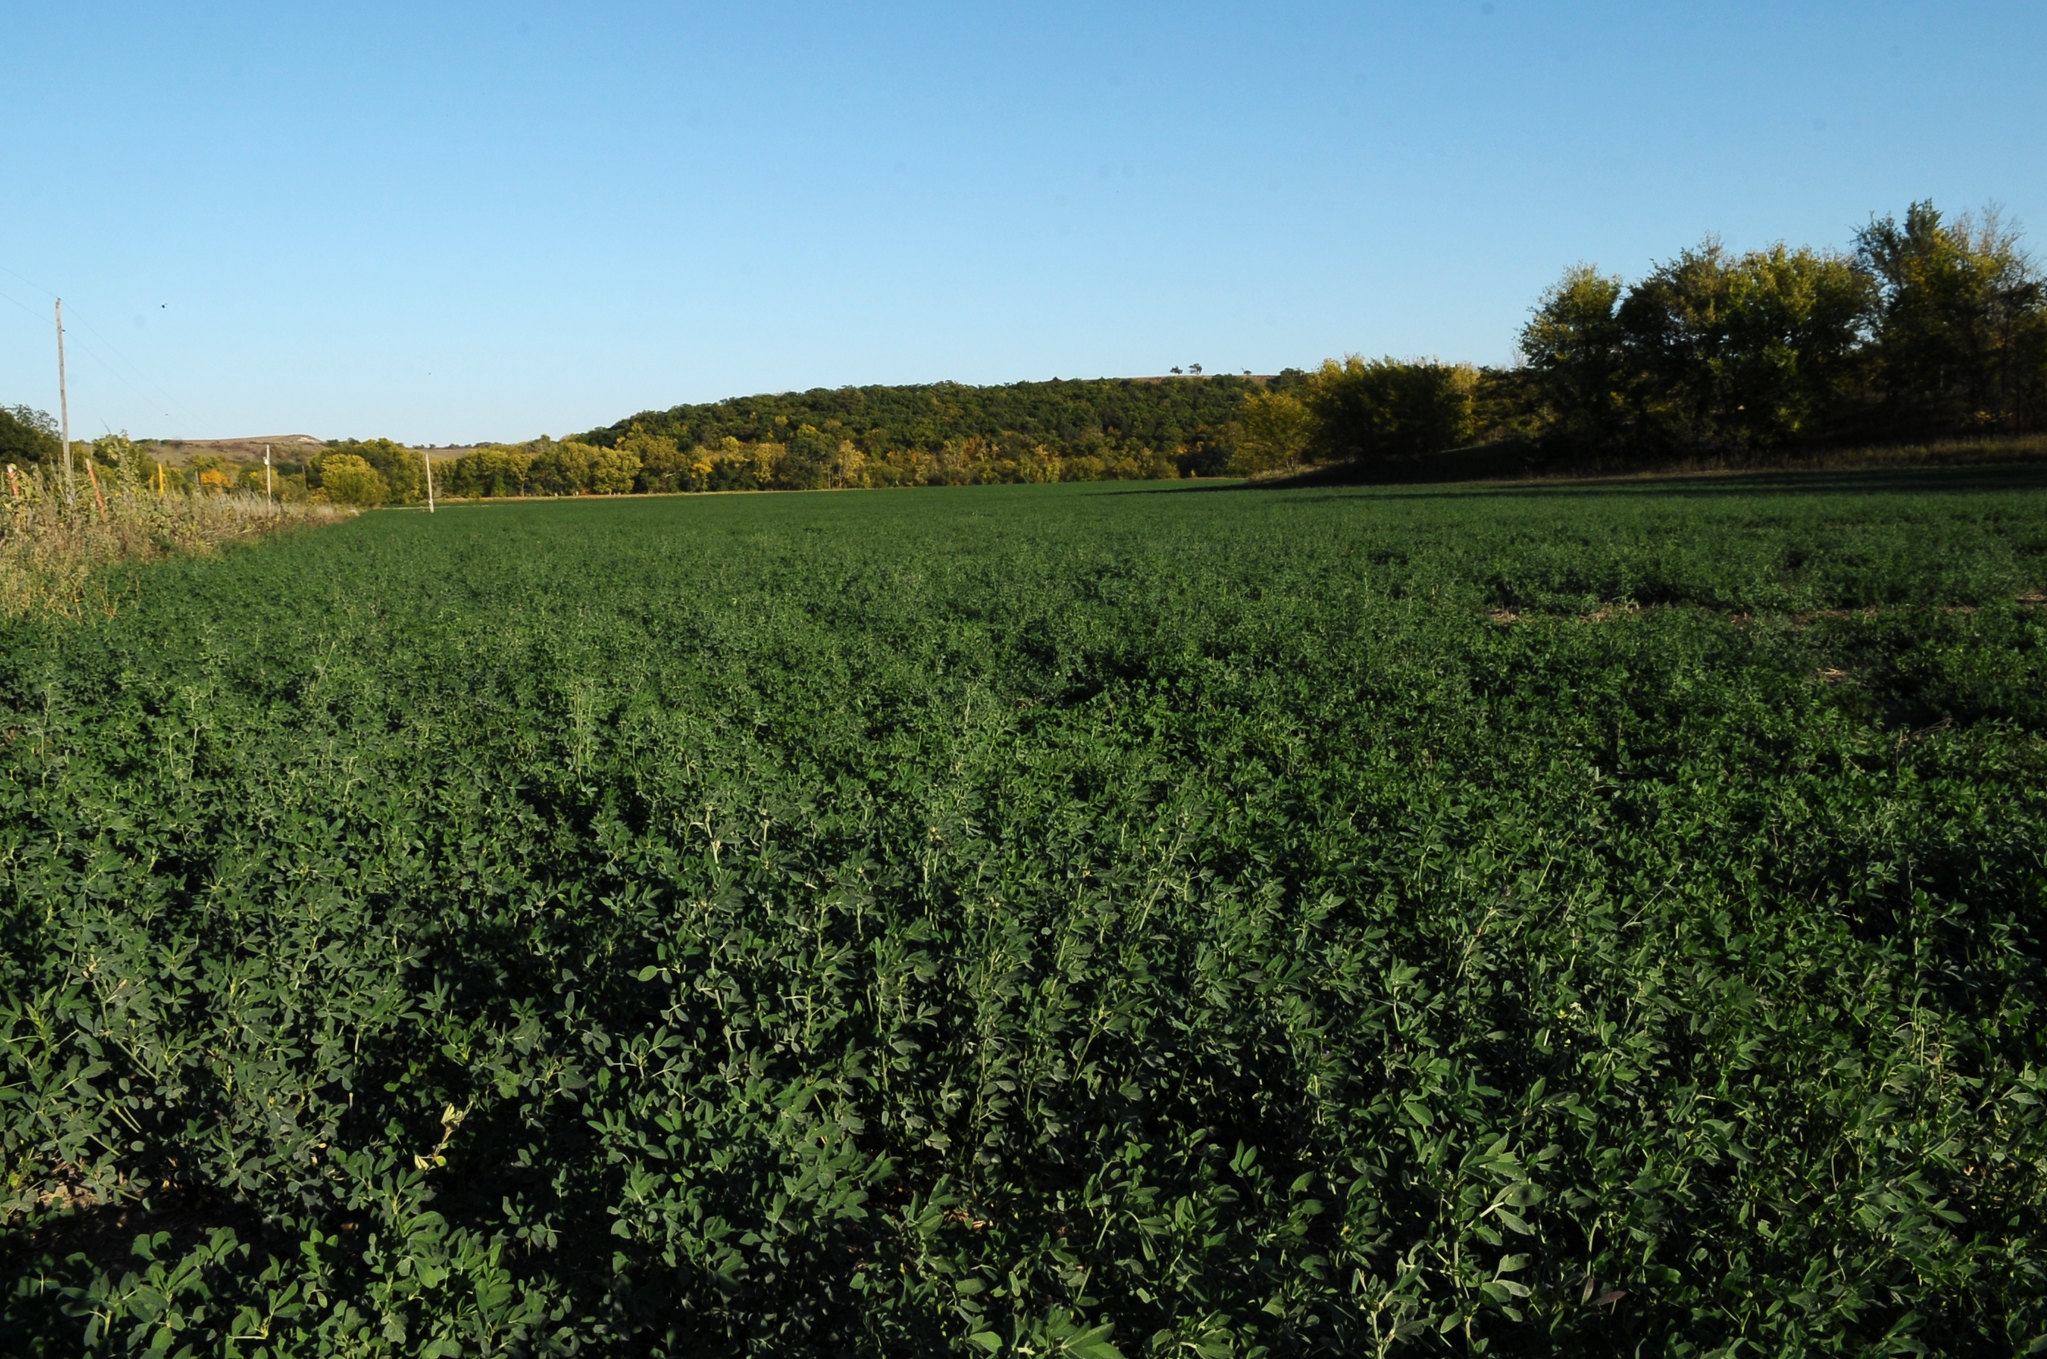 How To Select the Right Variety of Alfalfa